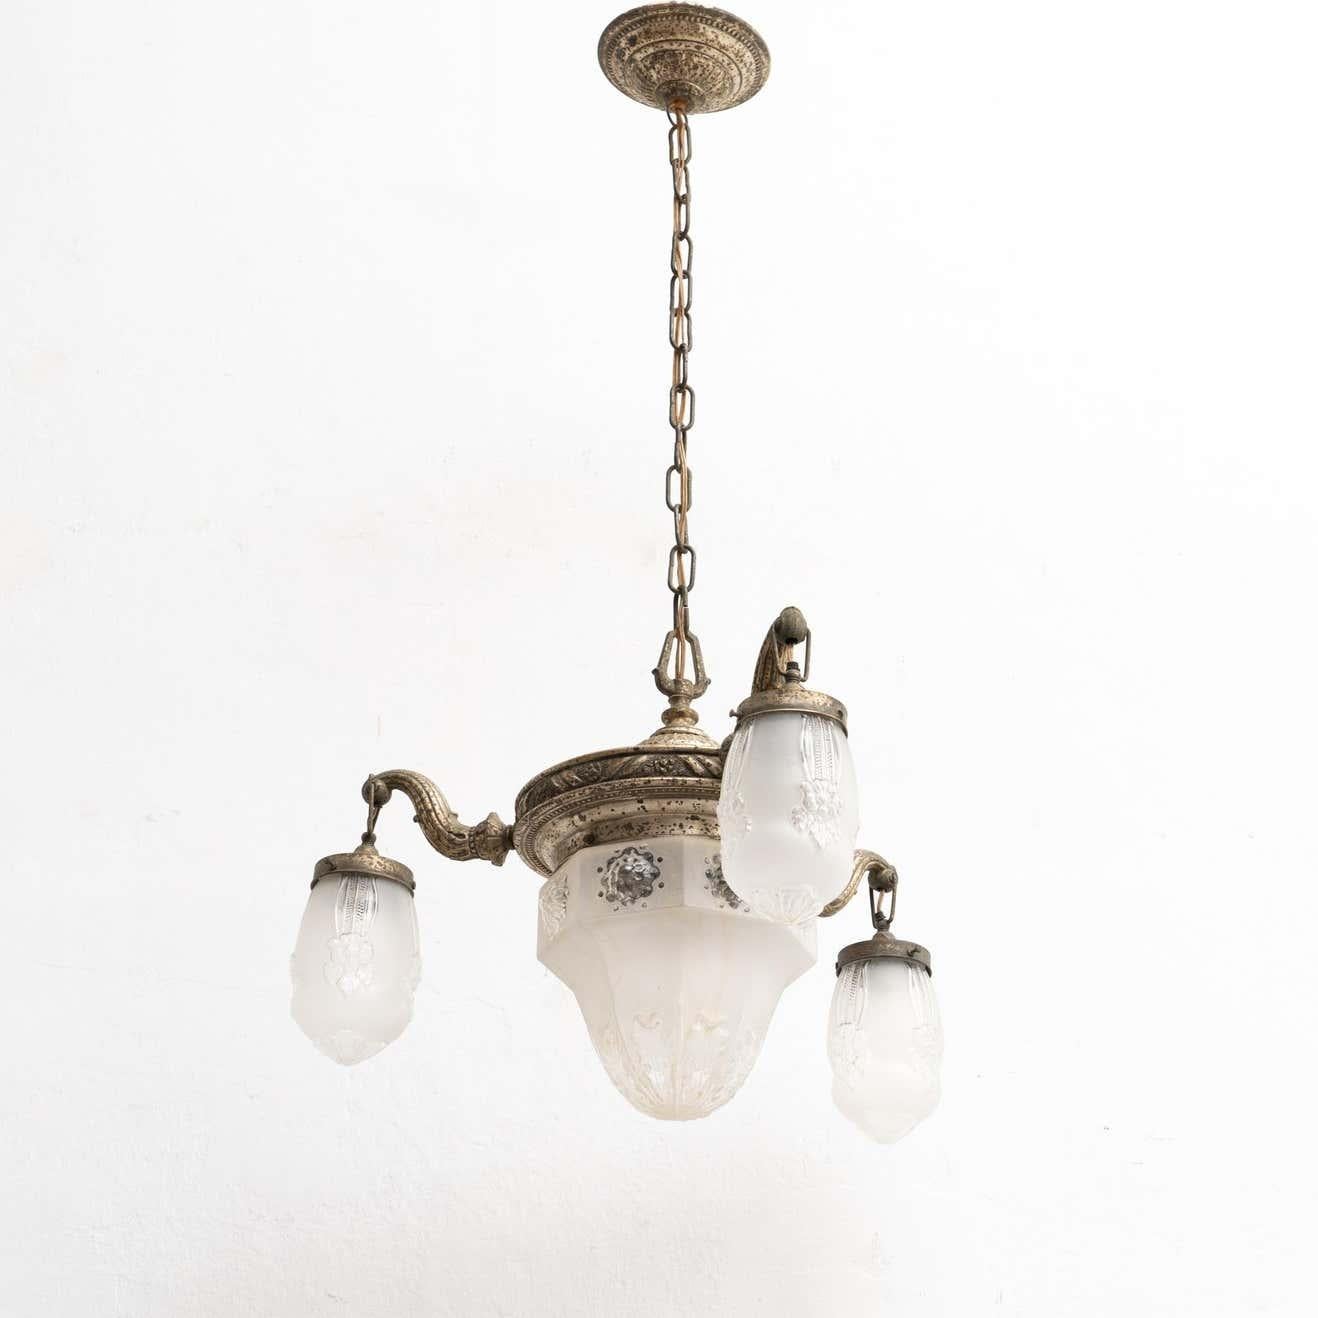 Mid-20th Century Vintage French Metal and Glass Ceiling Lamp, circa, 1930 For Sale